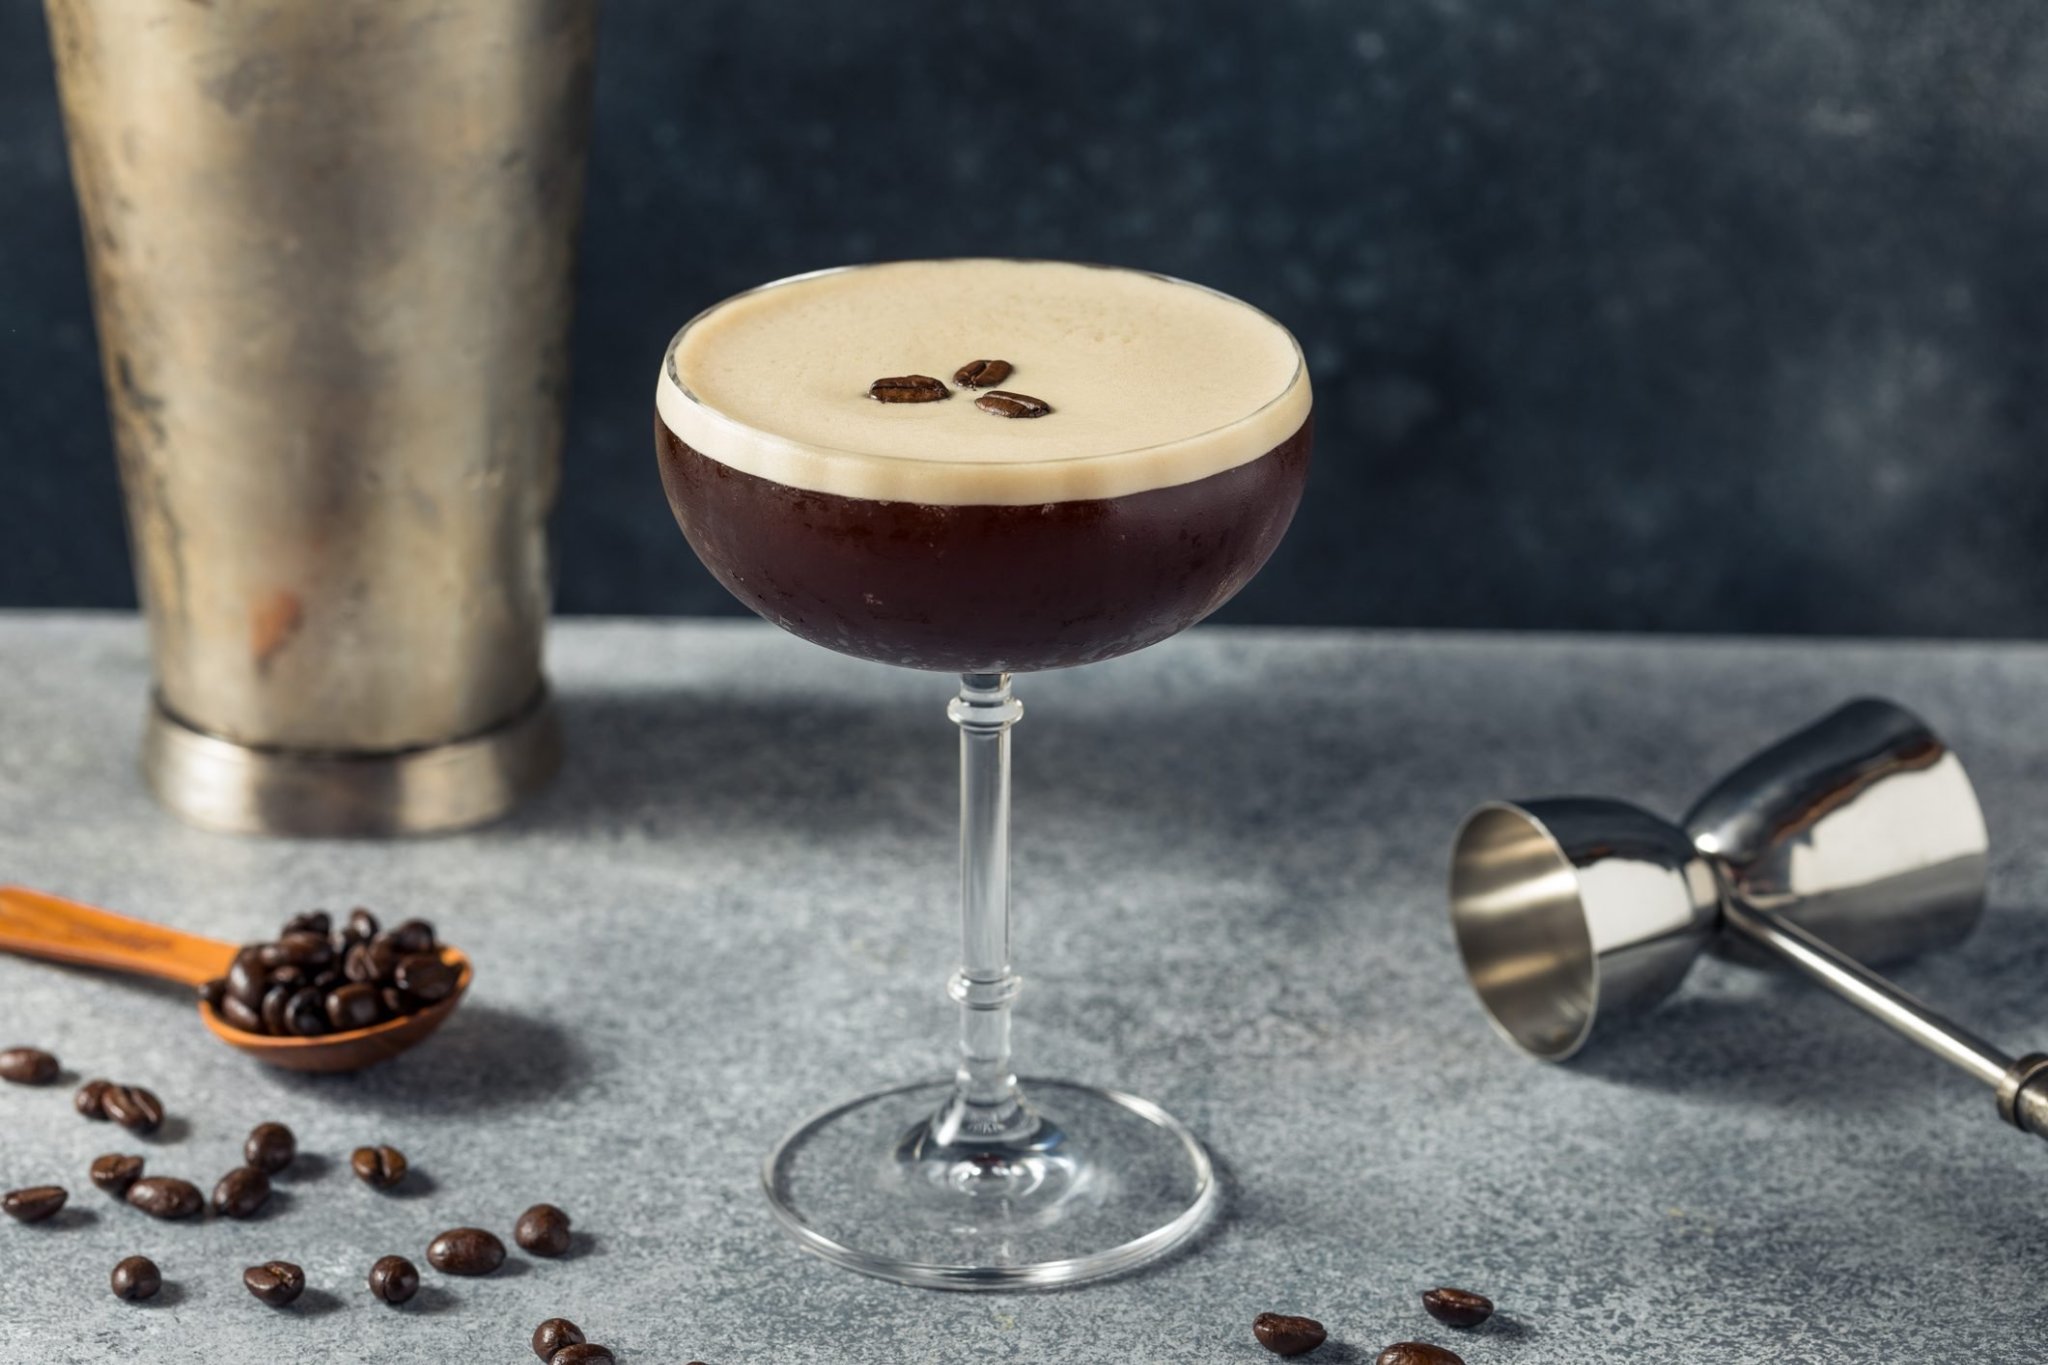 How to Make an Espresso Martini with the Classic Frothy Top